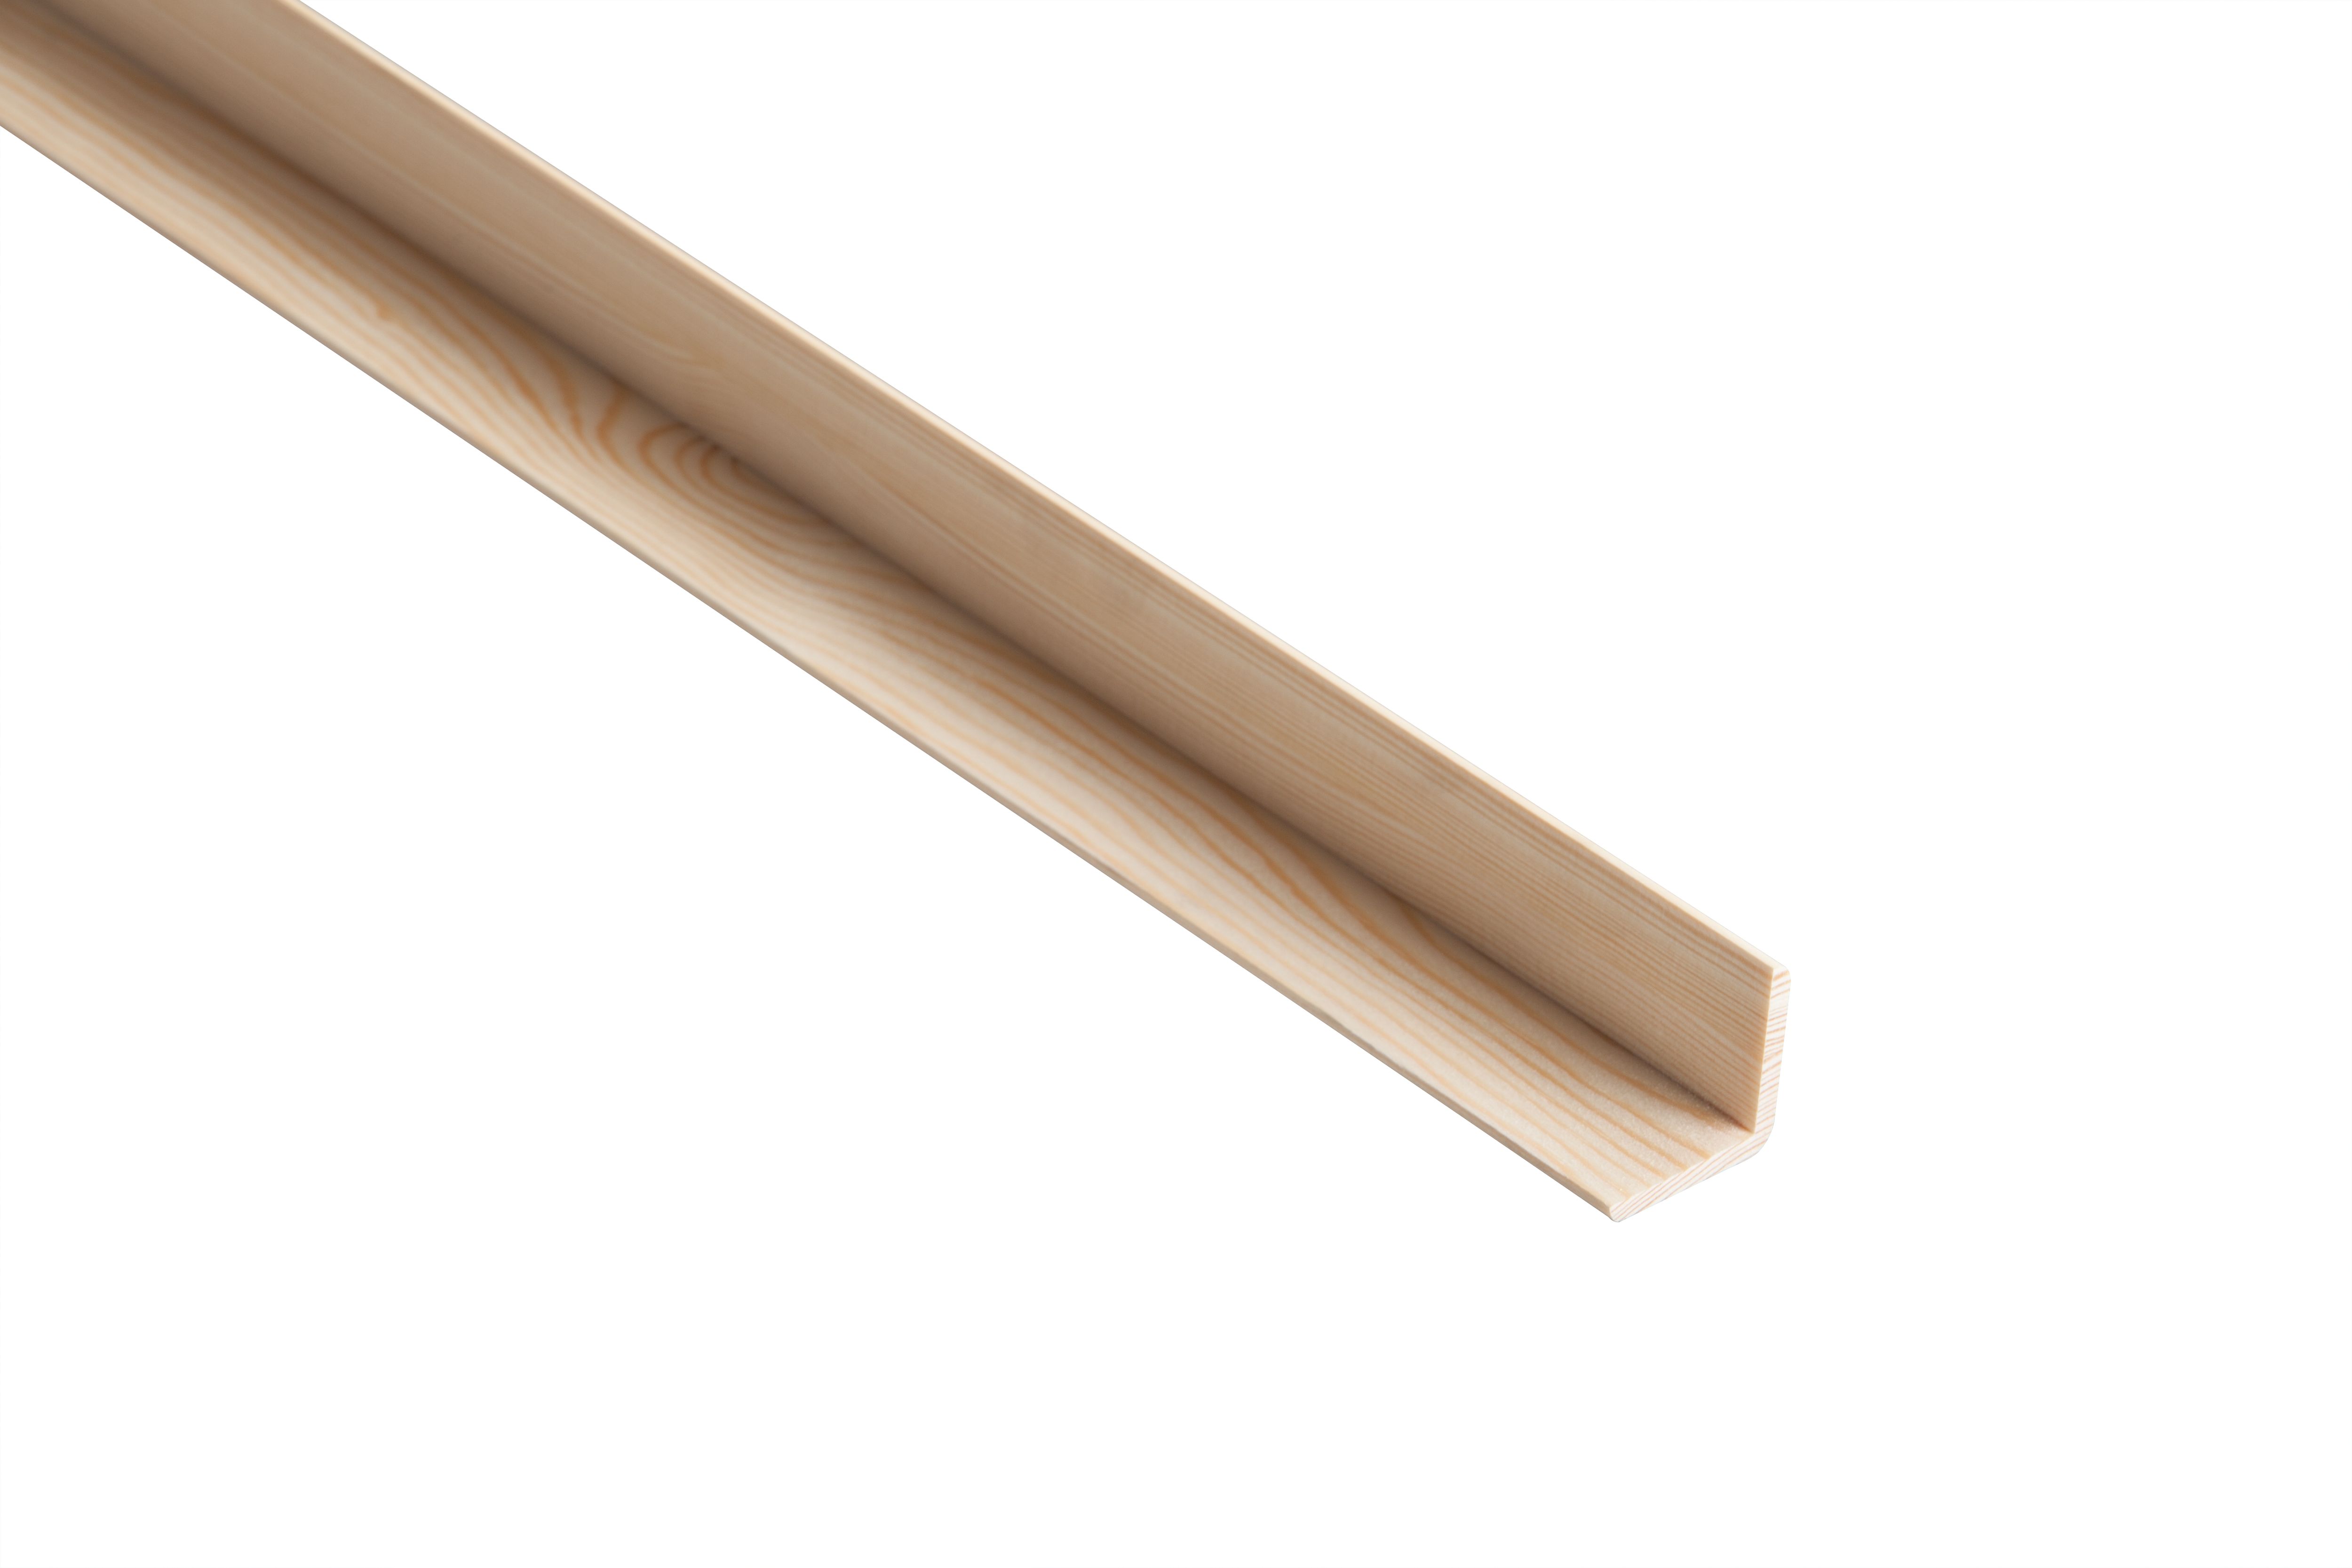 Image of Wickes Pine Angle Moulding - 40 x 40 x 2400mm